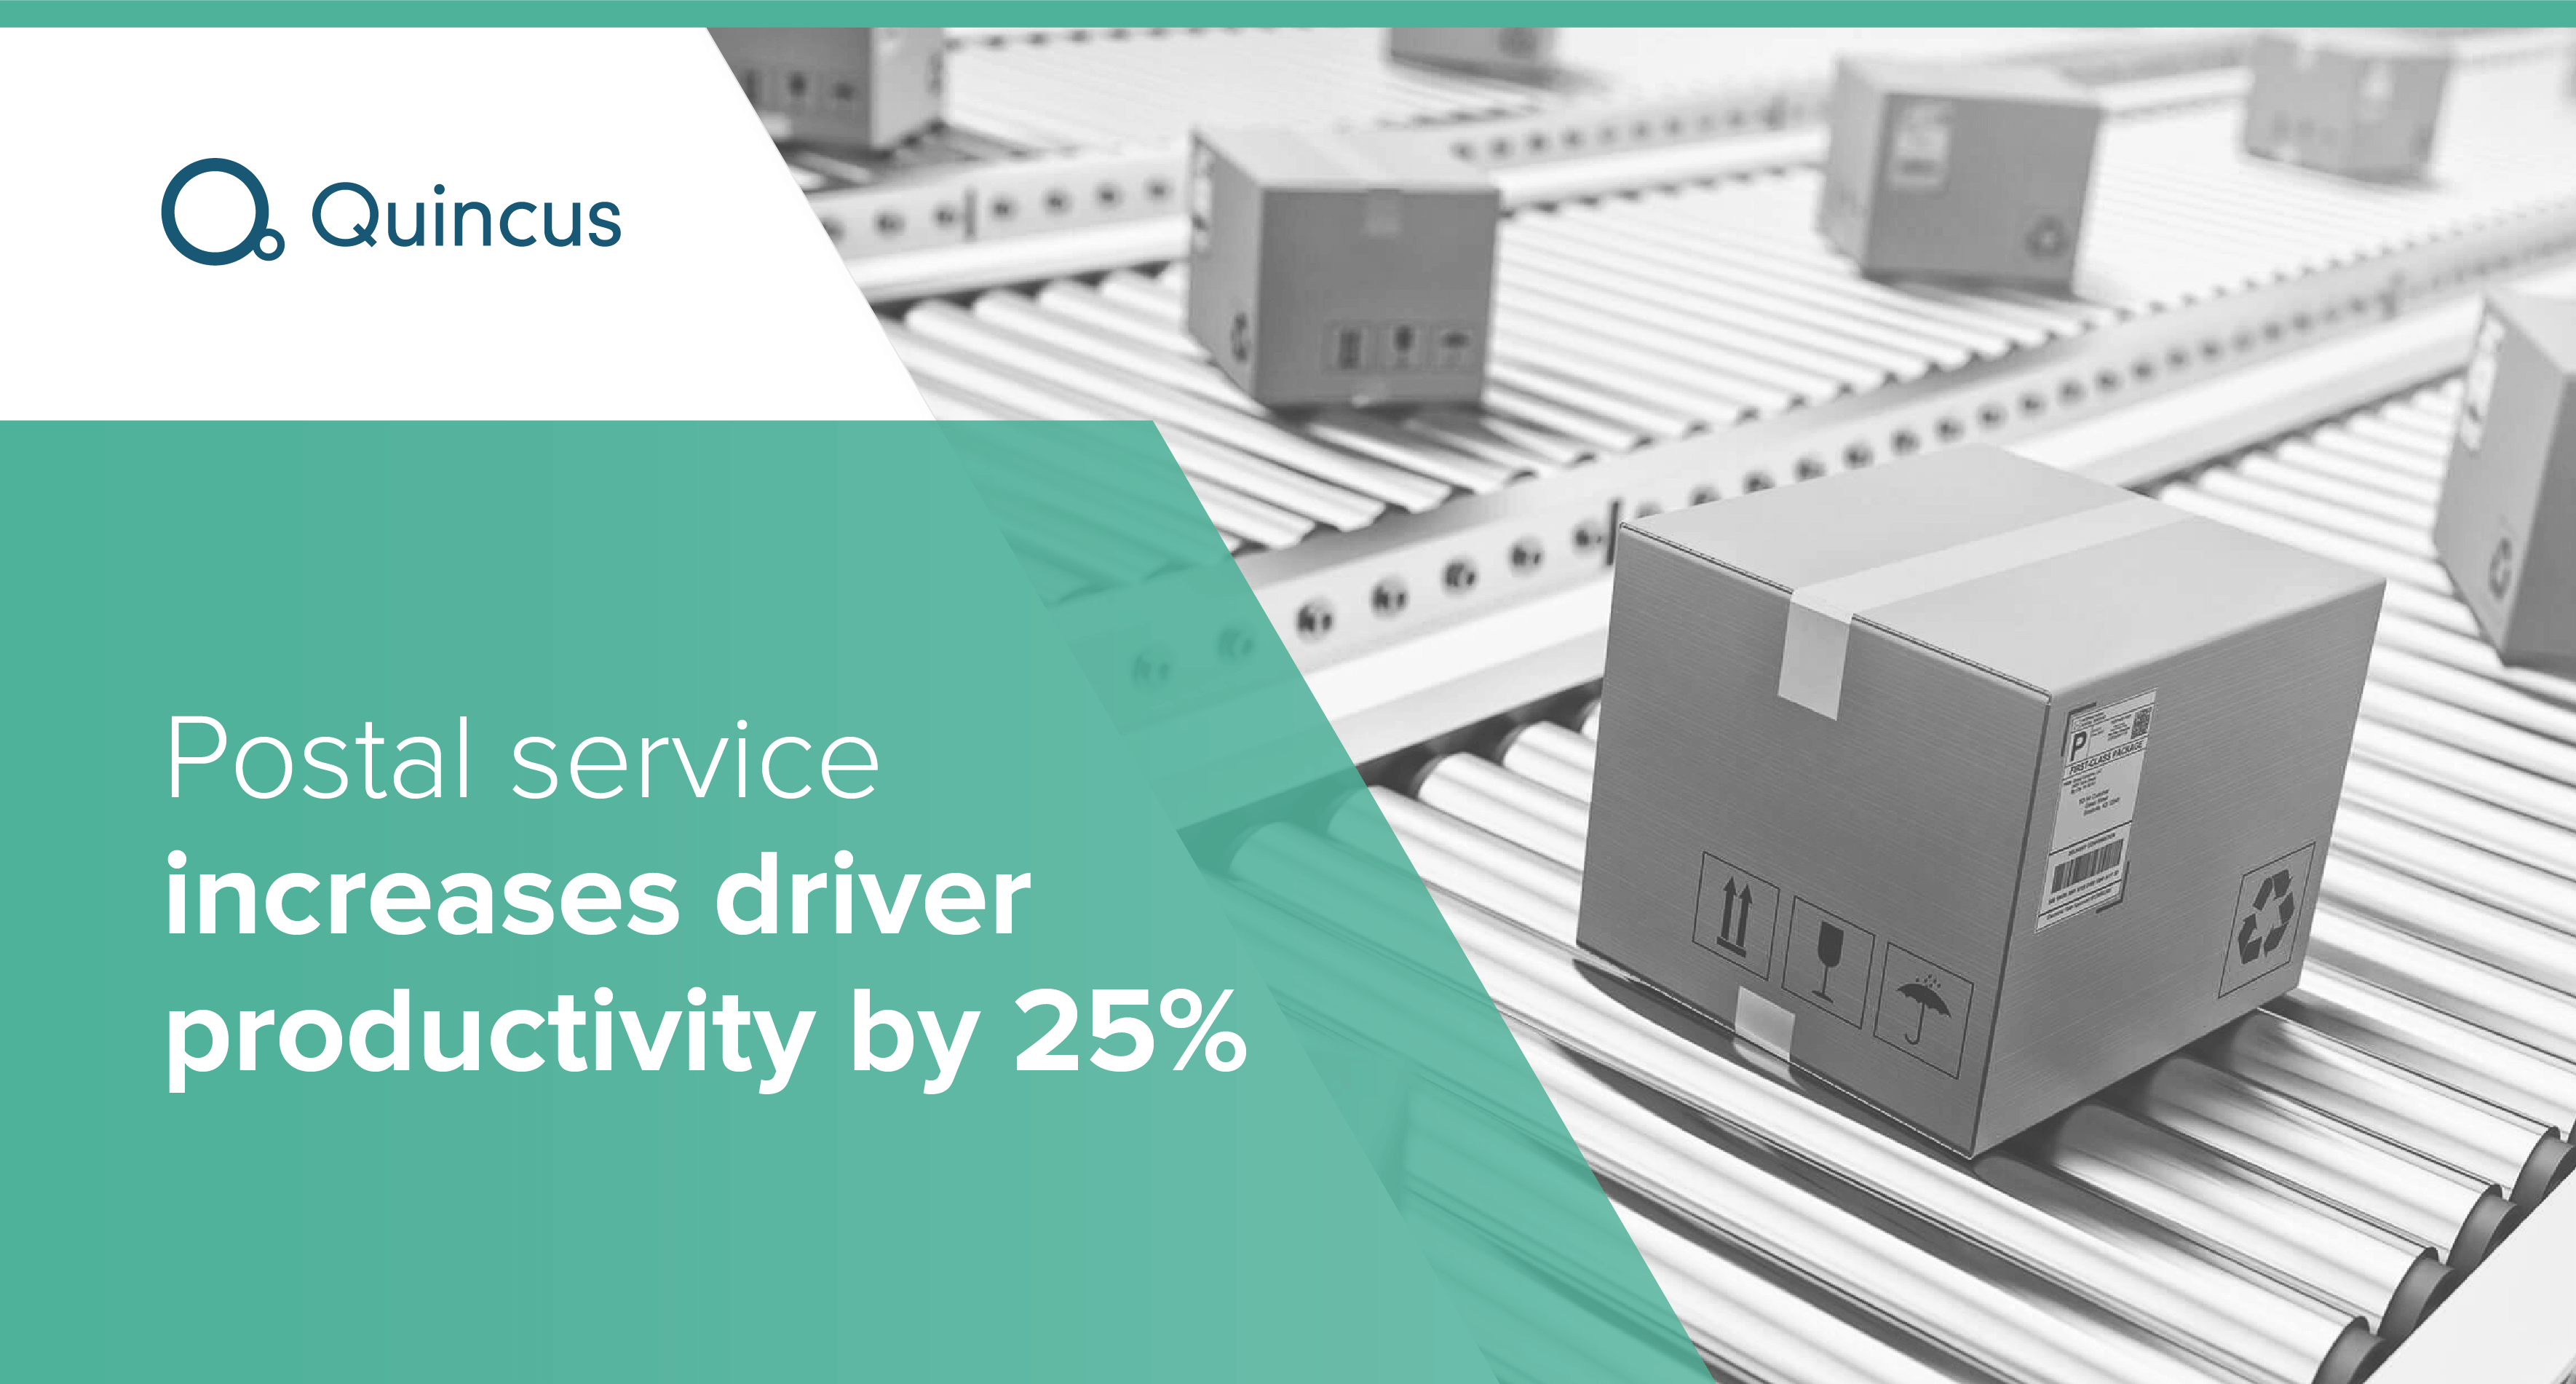 Postal service increases driver productivity by 25%